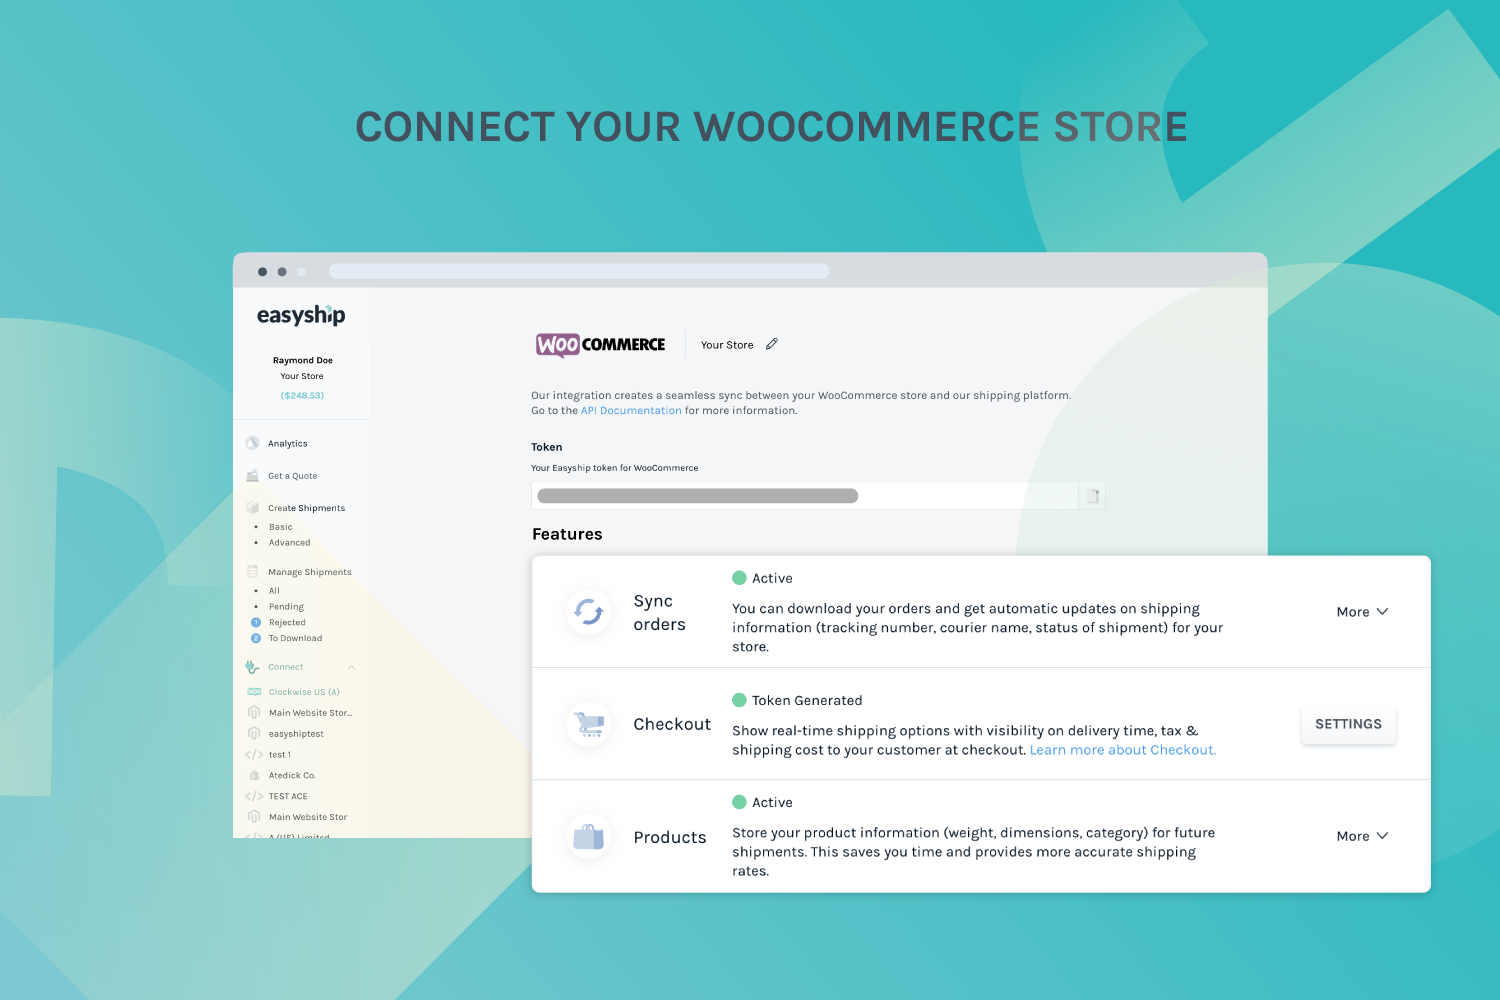 Connect your WooCommerce store